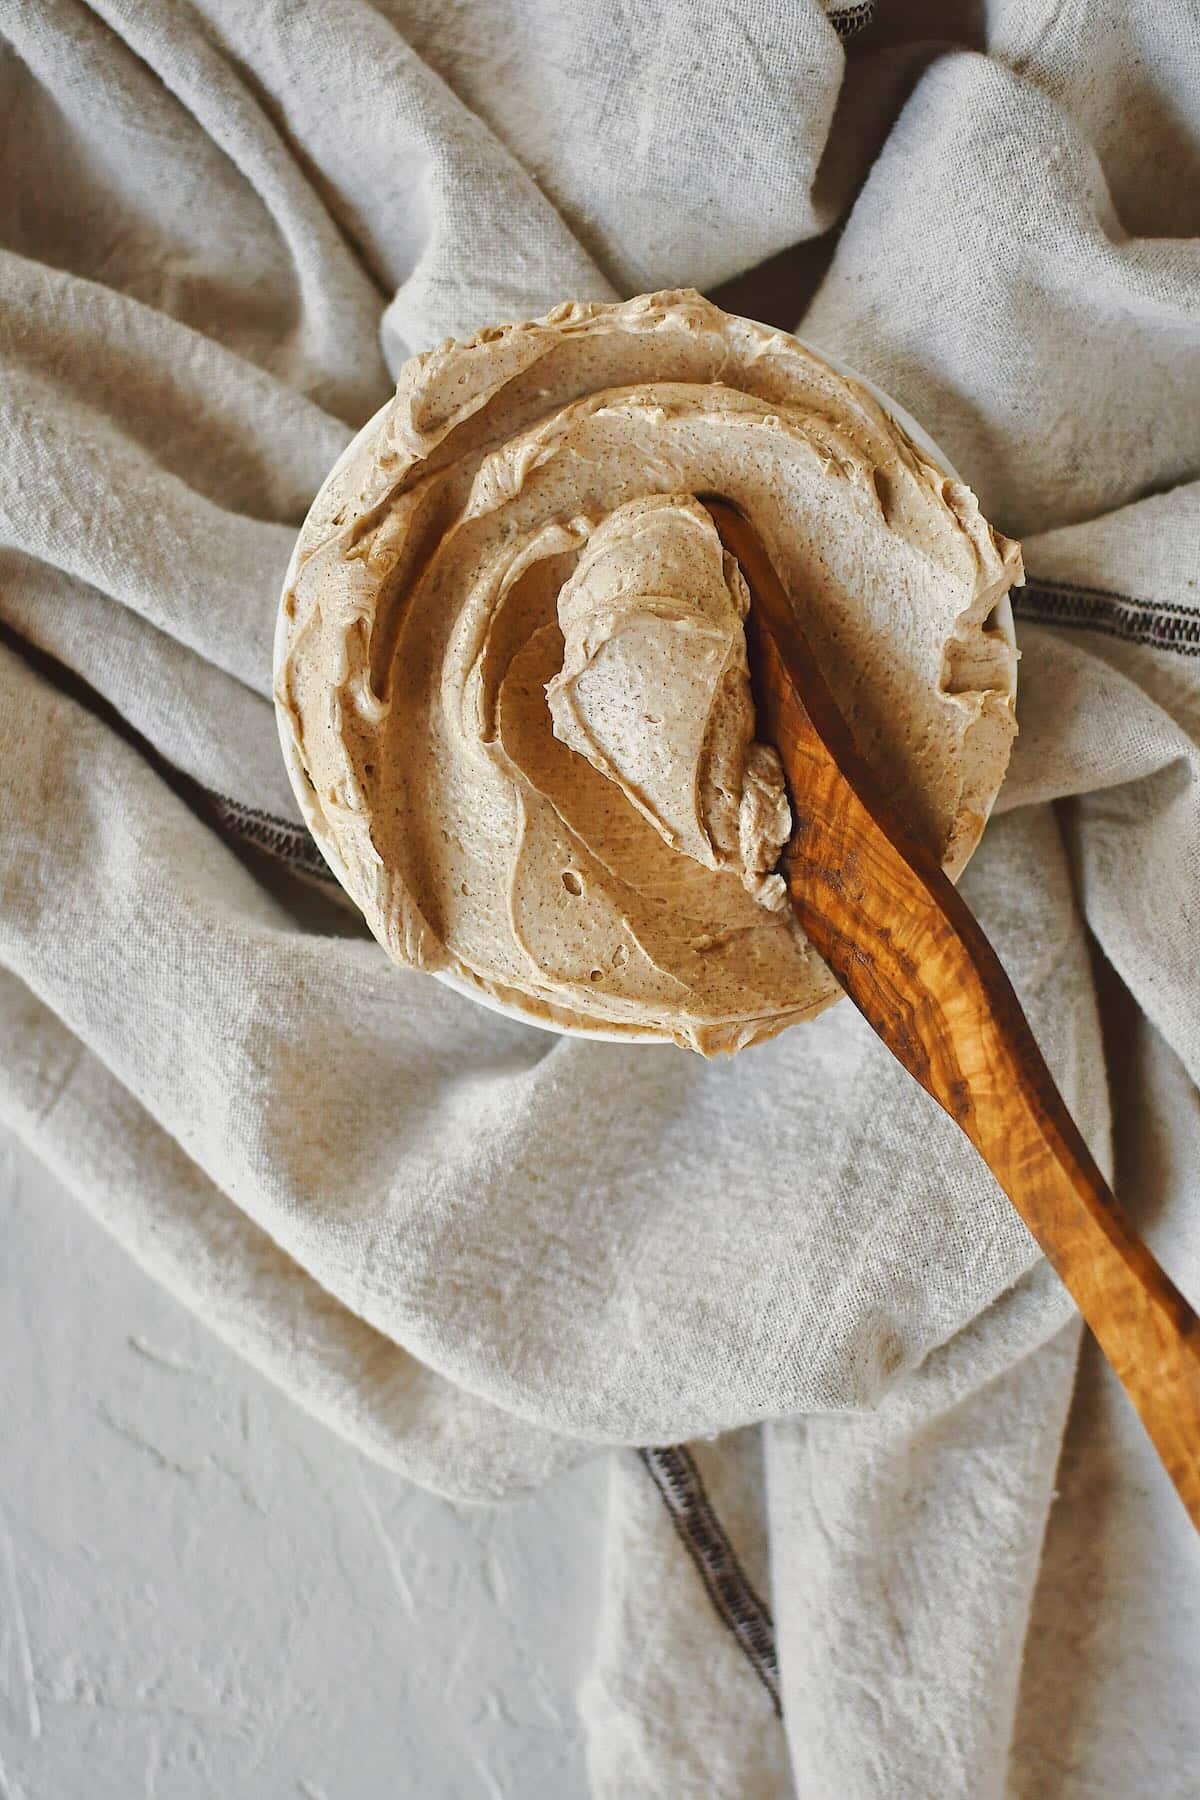 Cinnamon Butter that has been whipped to perfection, in a shallow bowl, with a wooden butter knife in it ready to be used.